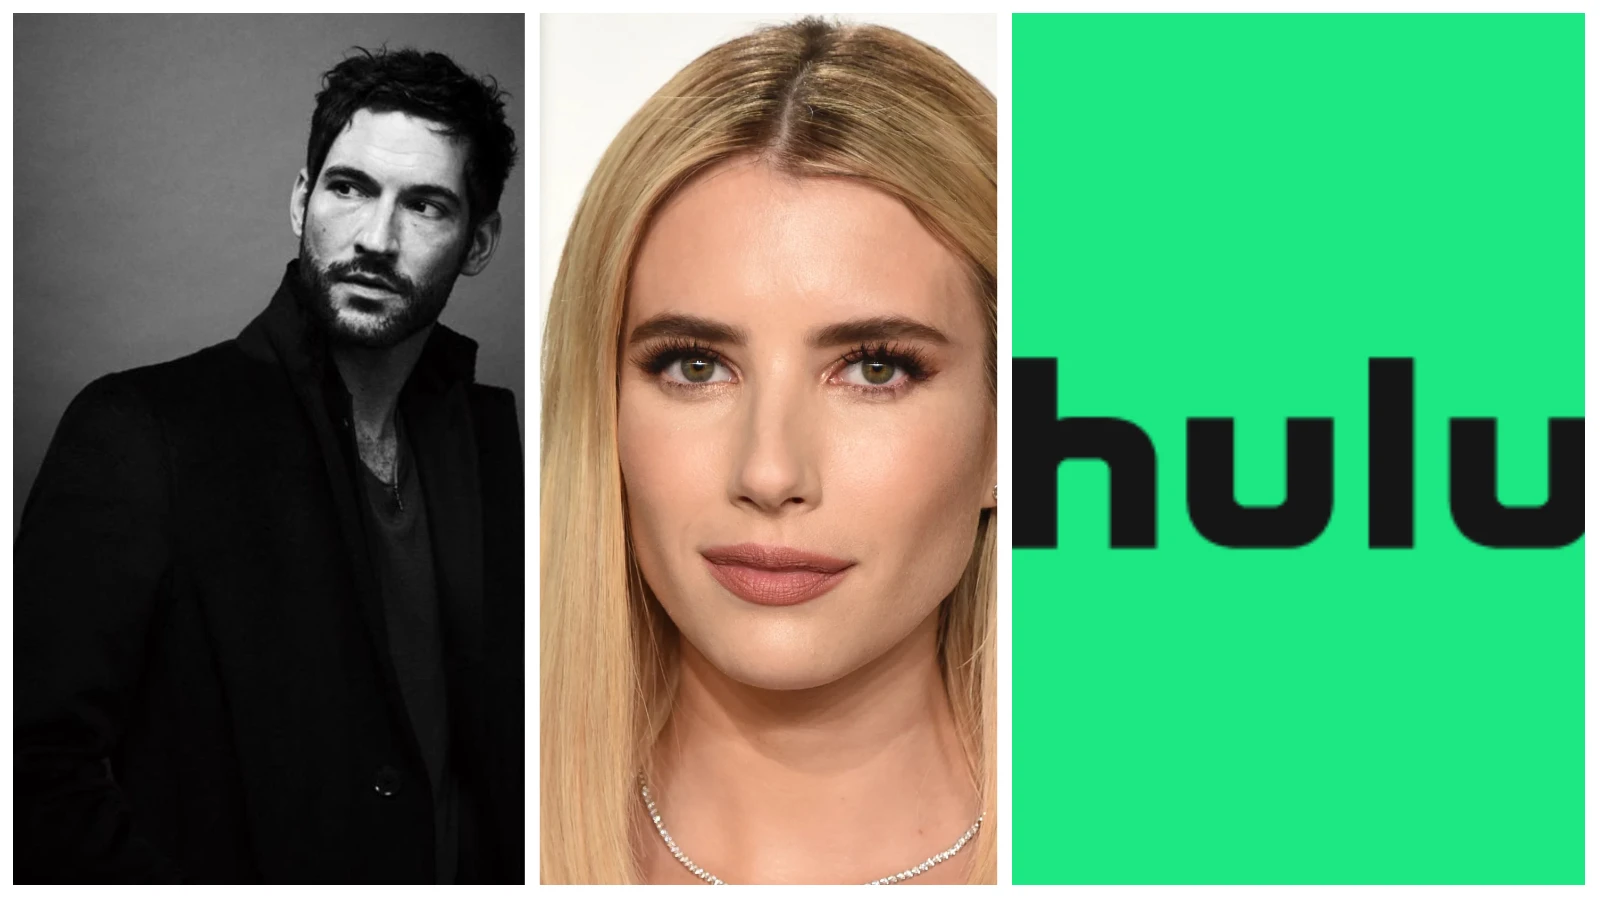 Emma Roberts And Tom Ellis Will be Staring in The New Hulu Dramady, Second Wife